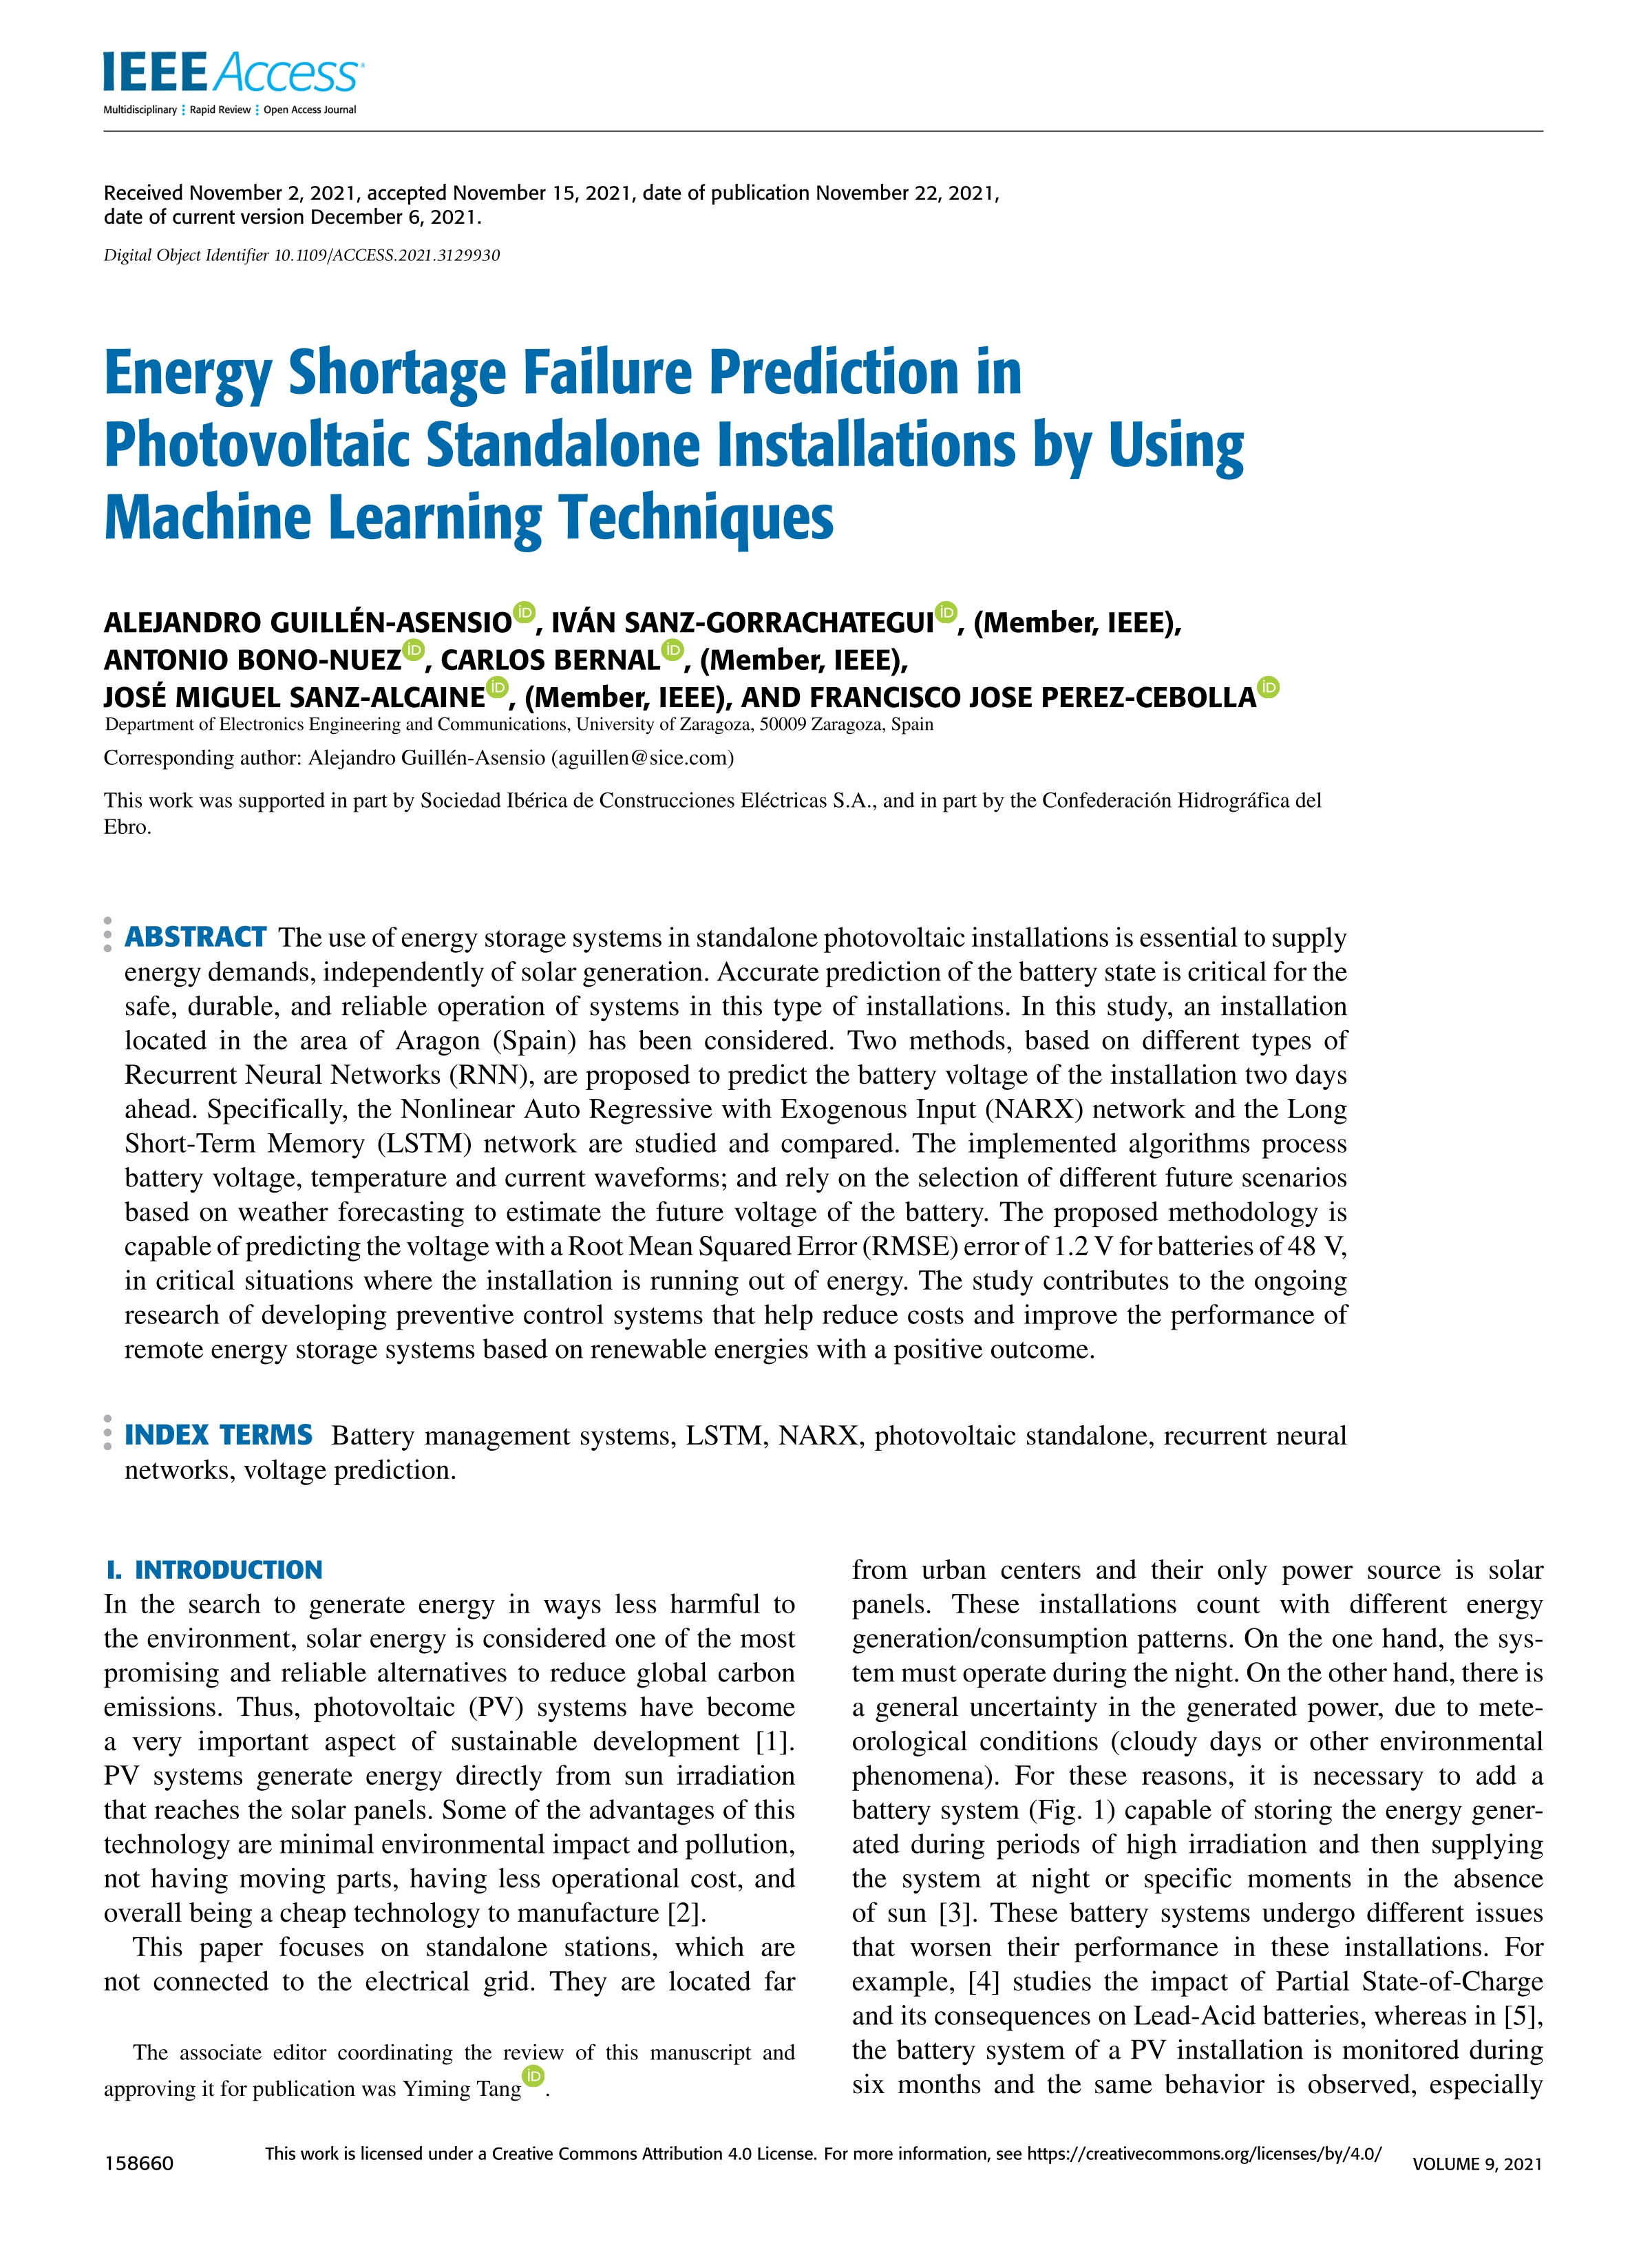 Energy shortage failure prediction in photovoltaic standalone installations by using machine learning techniques